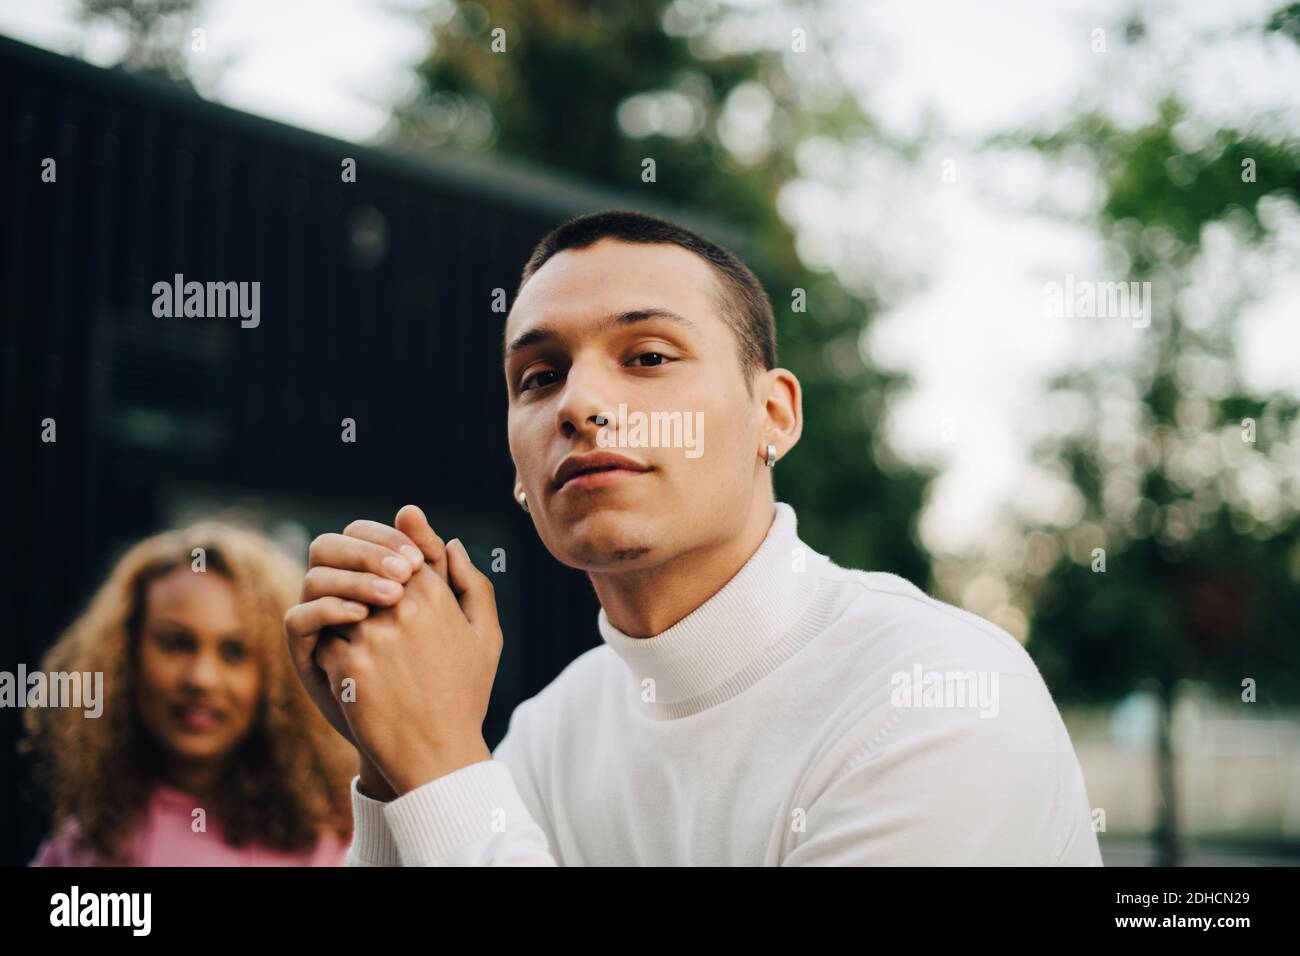 Portrait of young man with woman in background Stock Photo